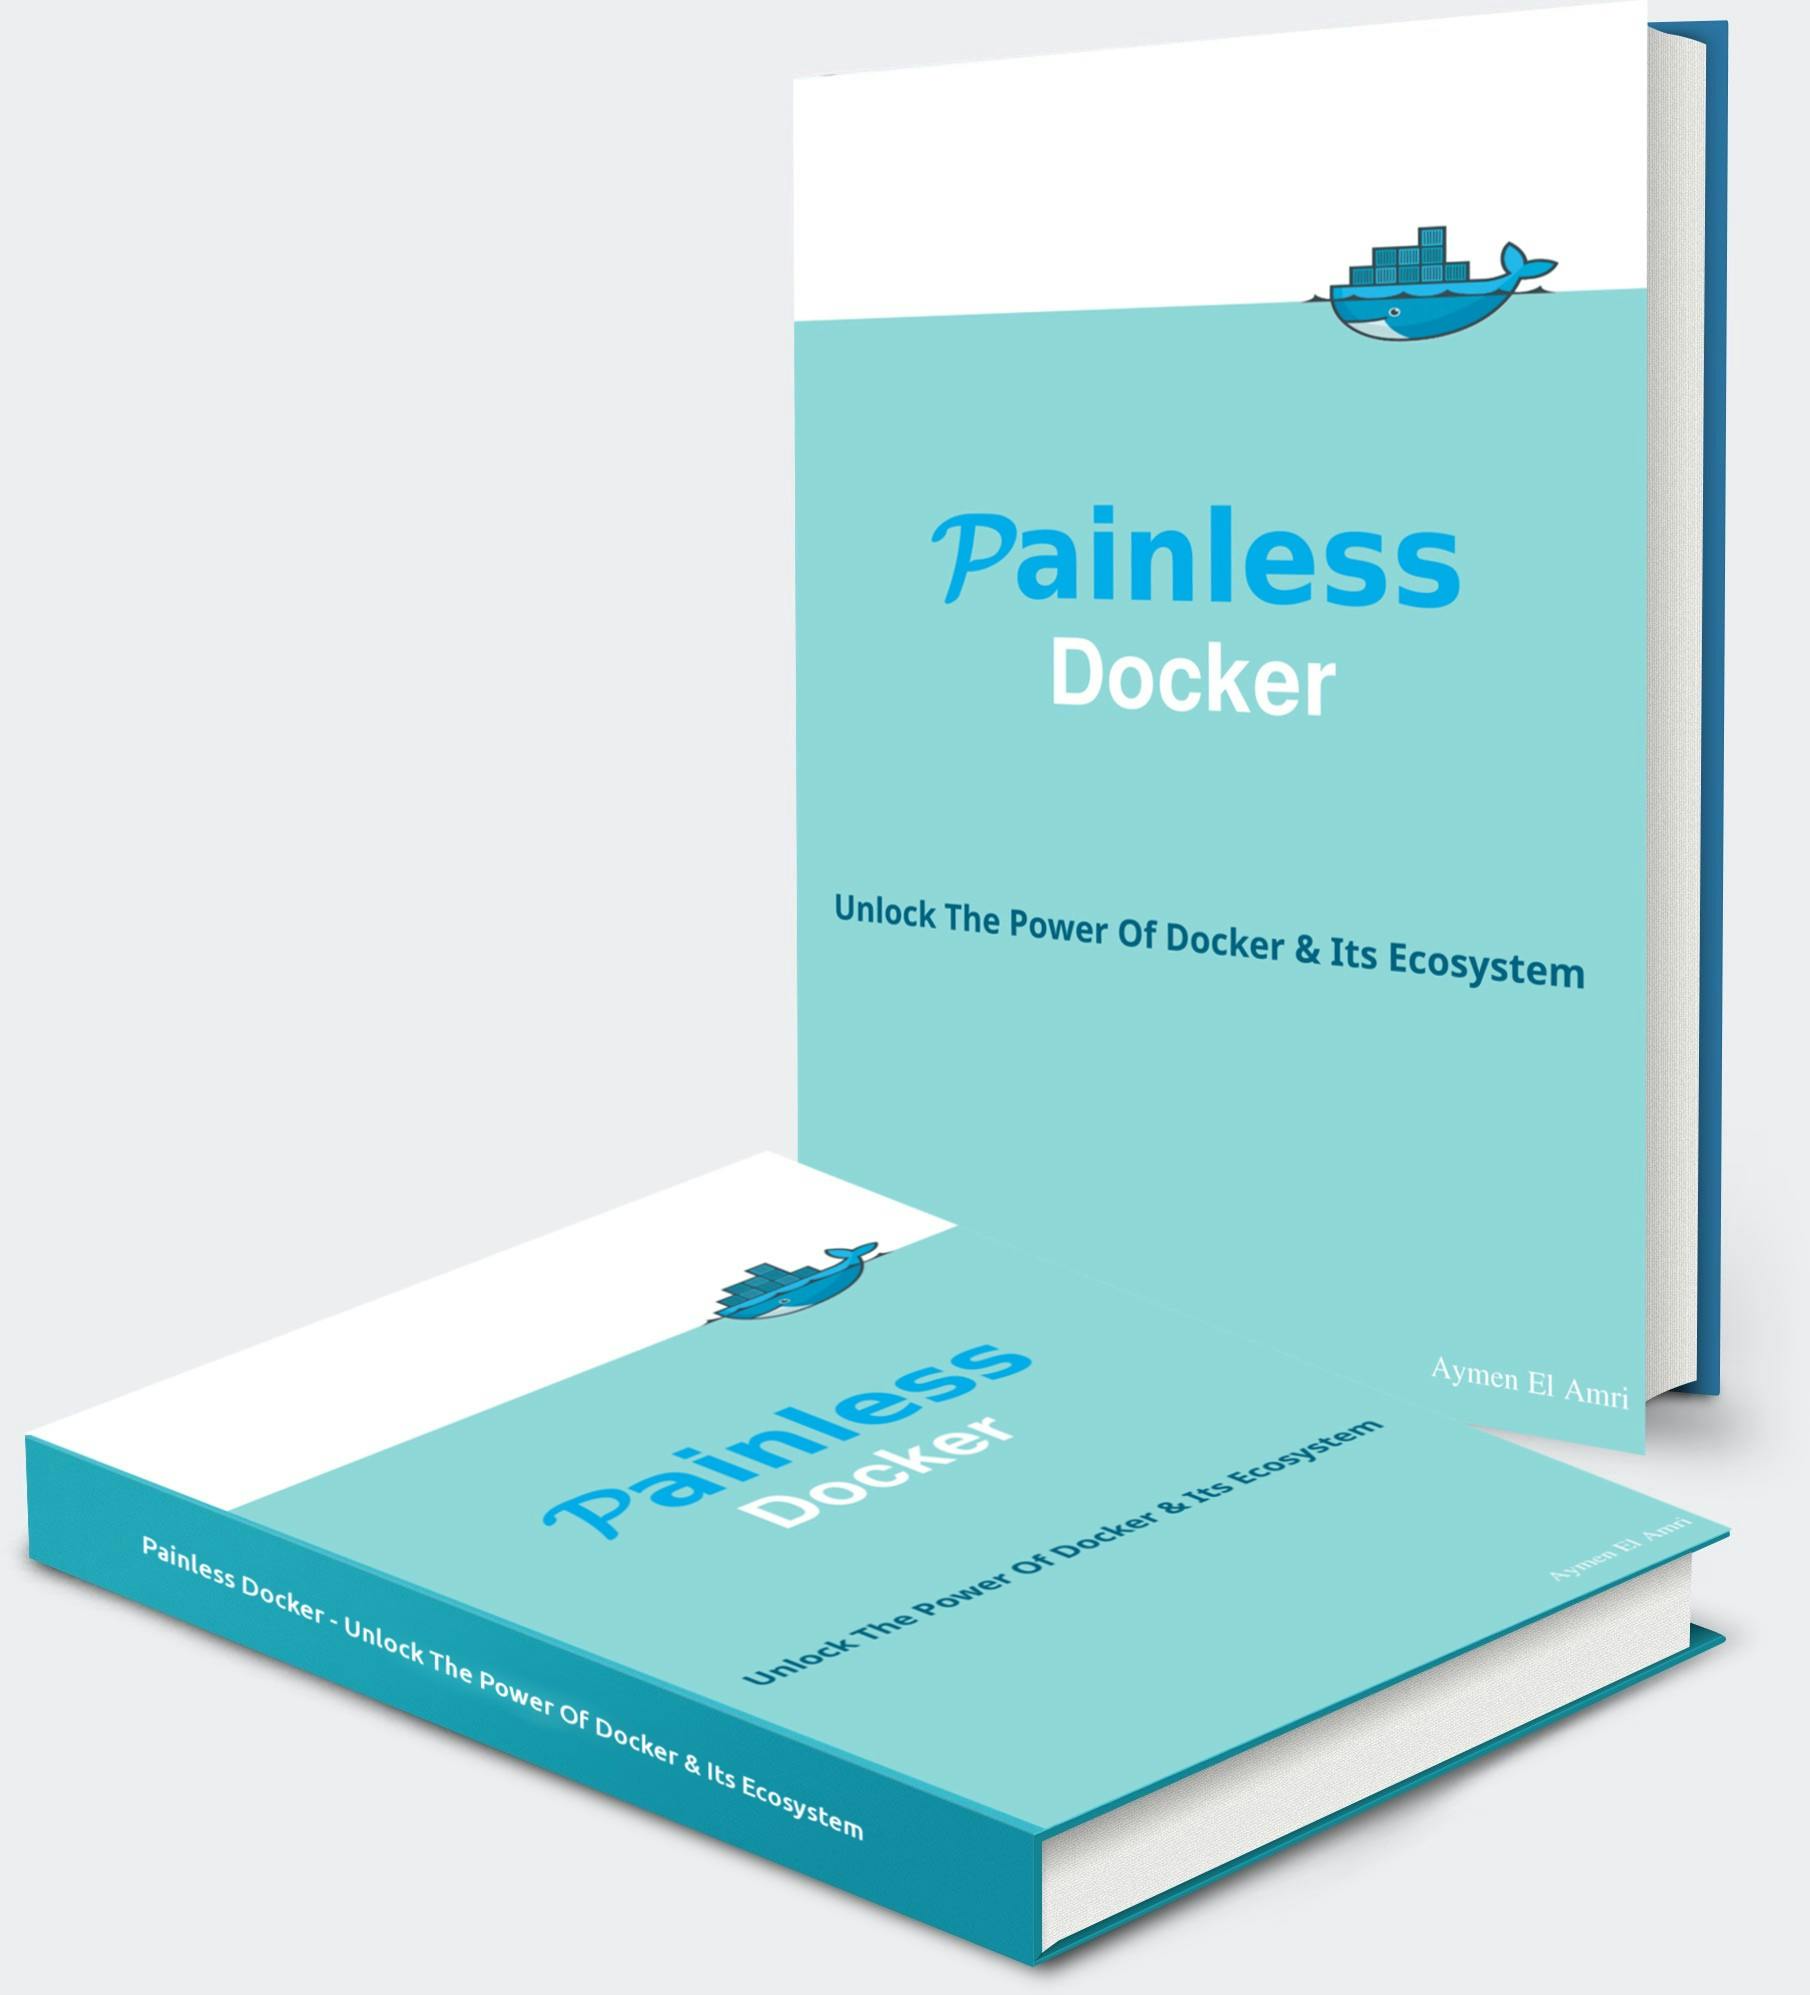 featured image - Architecting a Highly Available and Scalable Wordpress Using Docker Swarm, Traefik & GlusterFS…